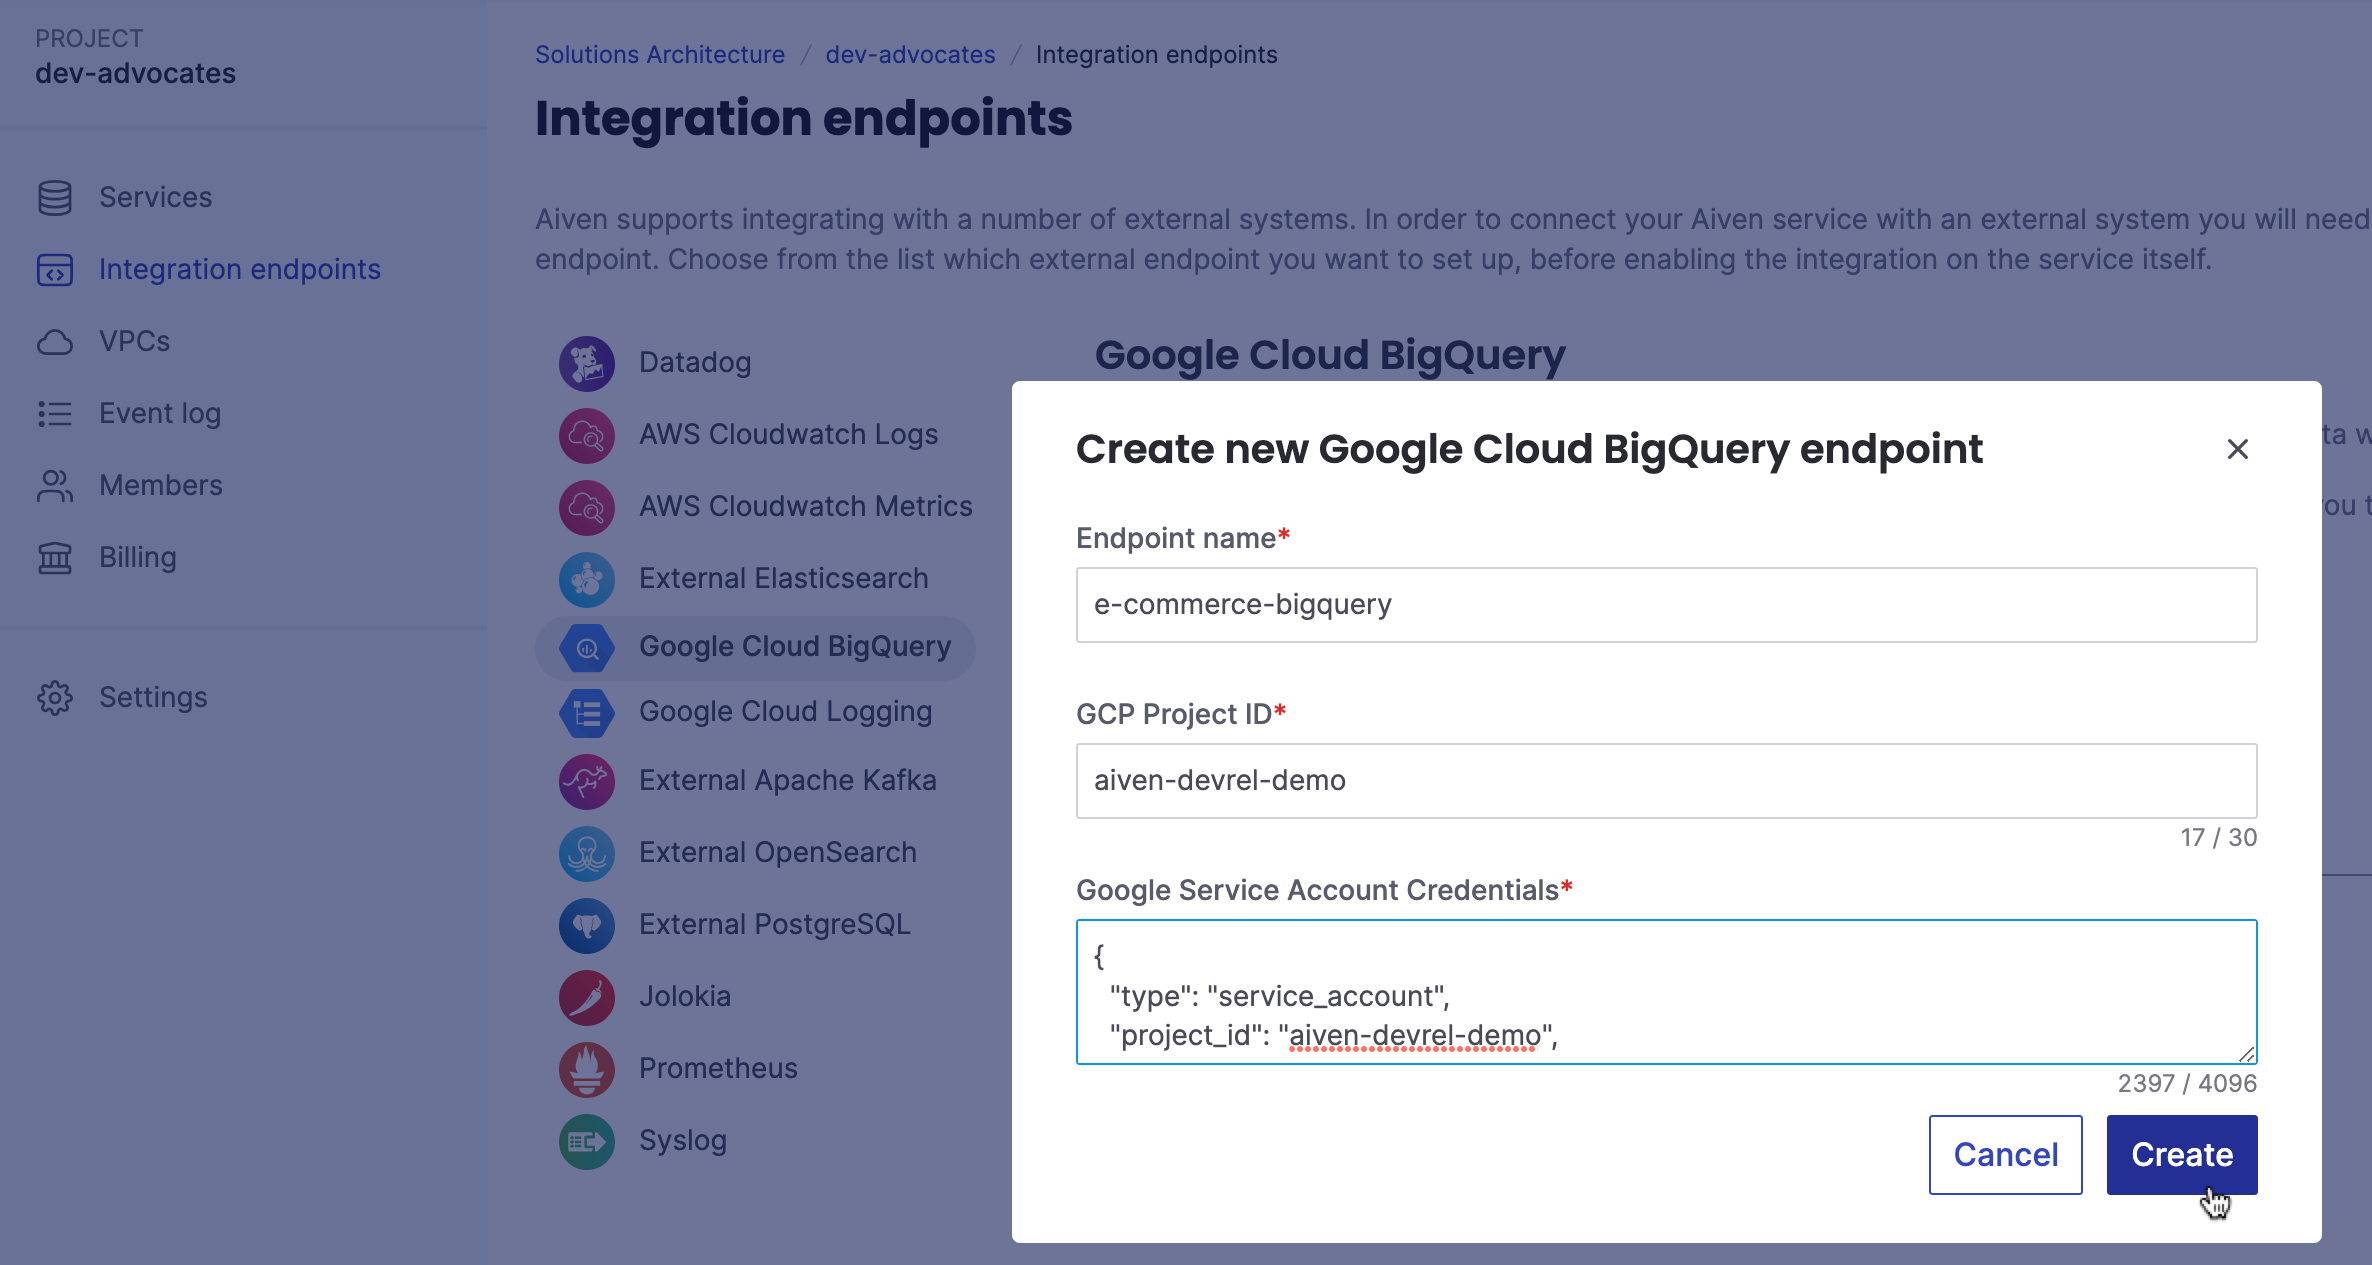 Creating a new Google Cloud BigQuery endpoint